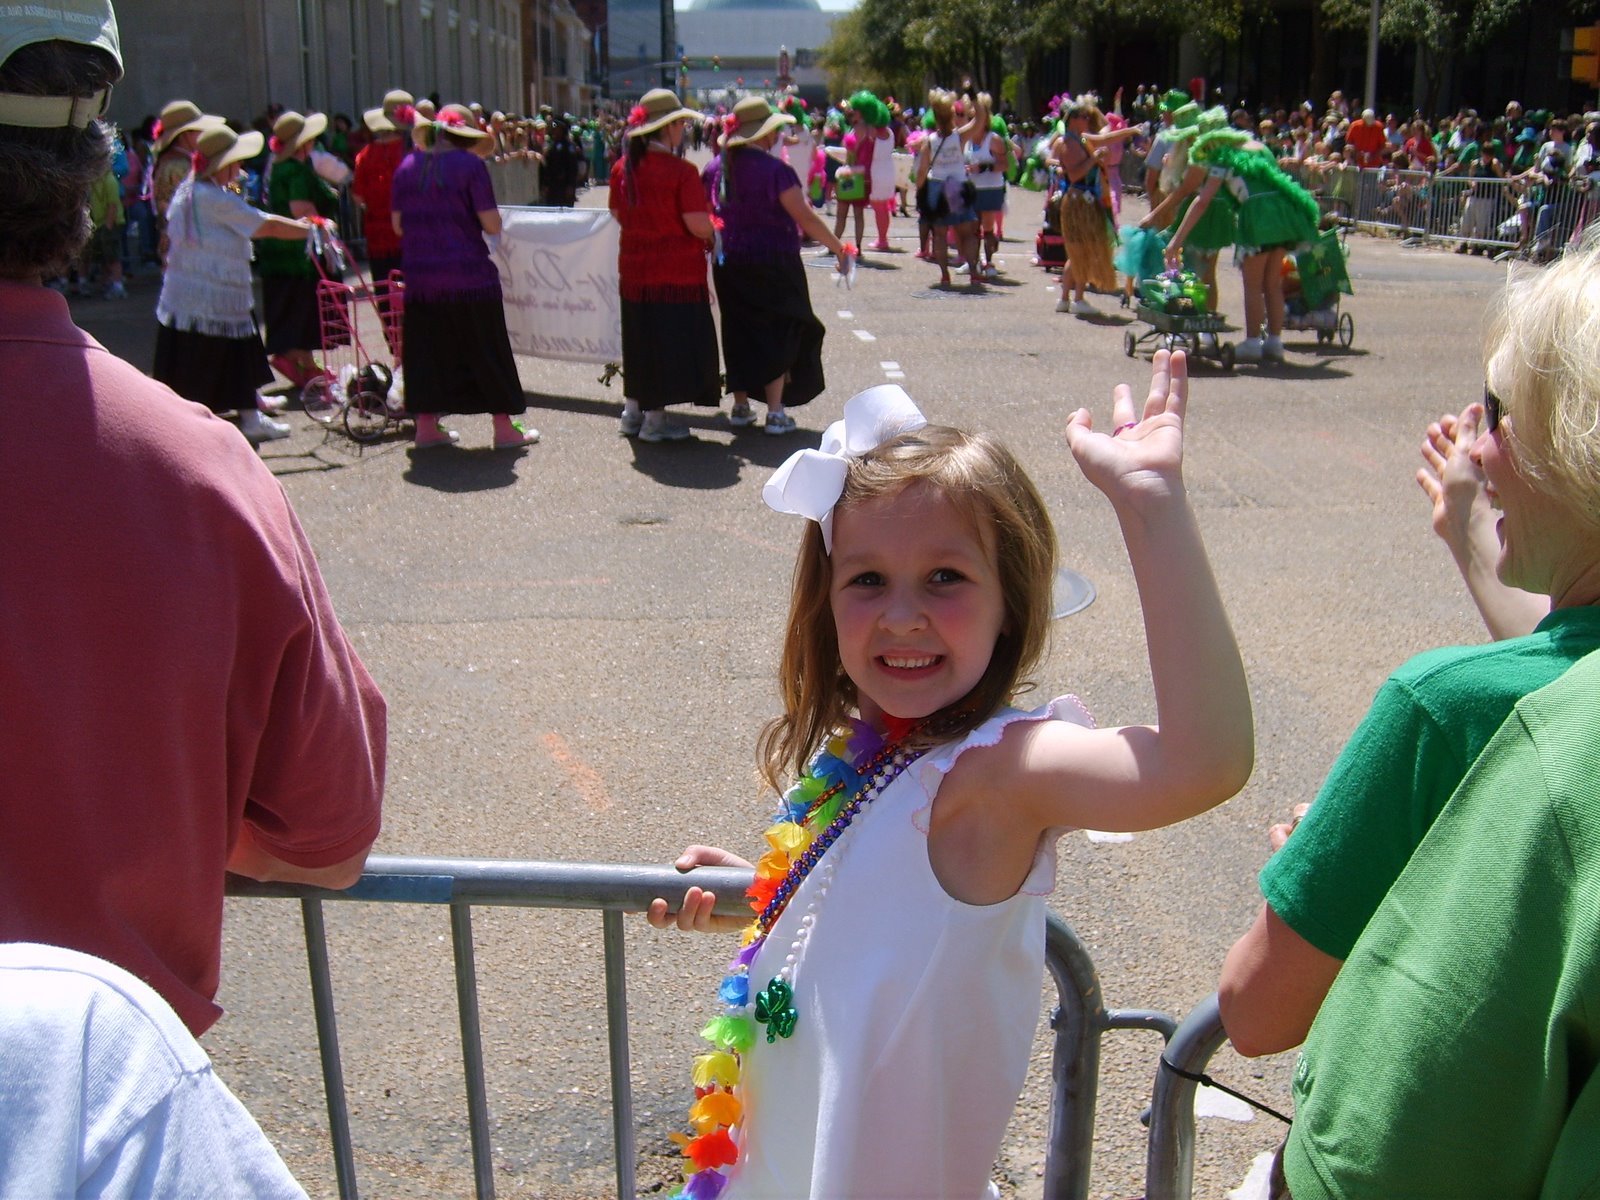 [St.+Paddy's+Day+parade+004.jpg]